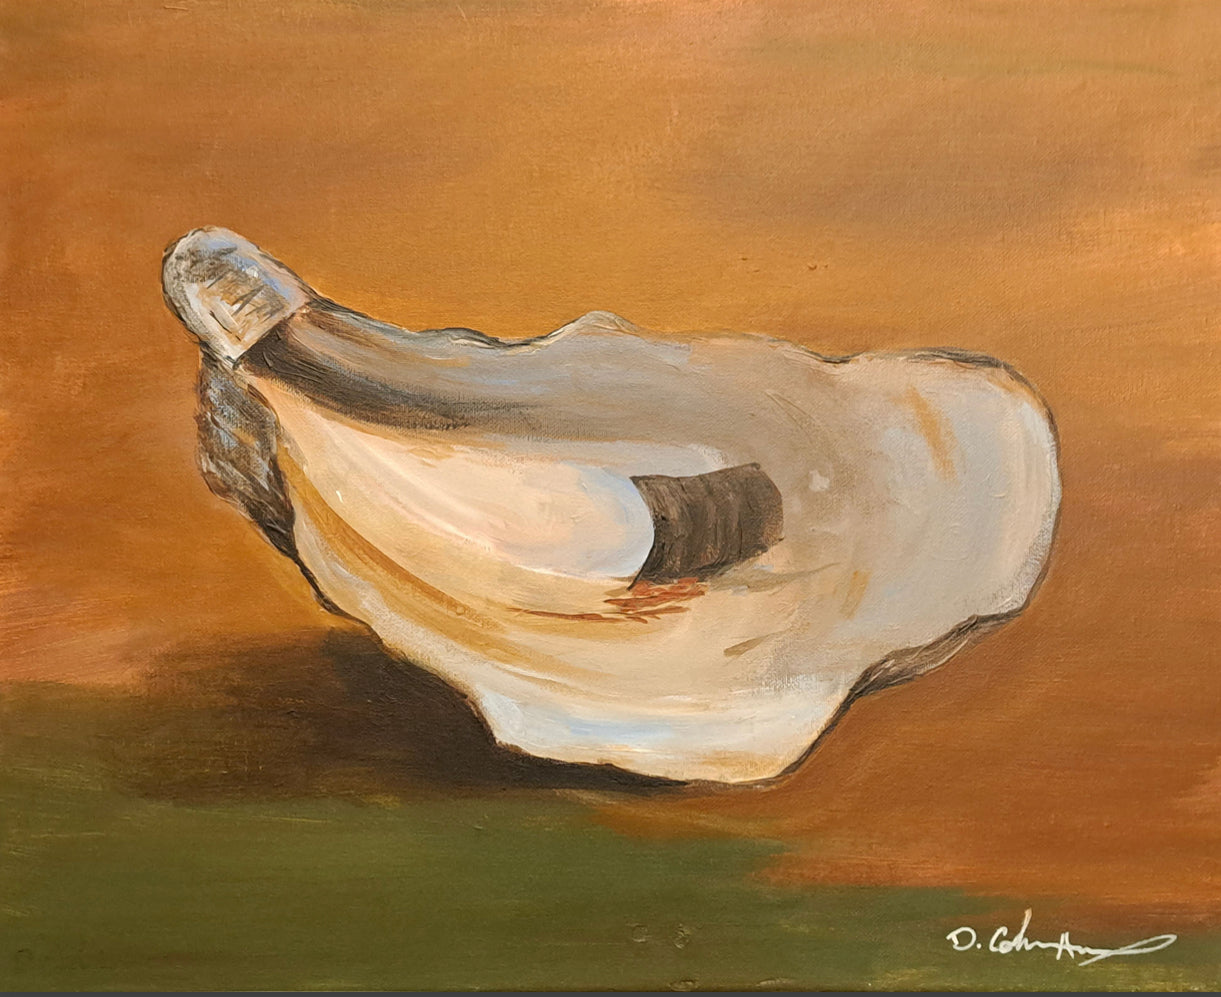 “Oyster Study 9” by Dana Coleman